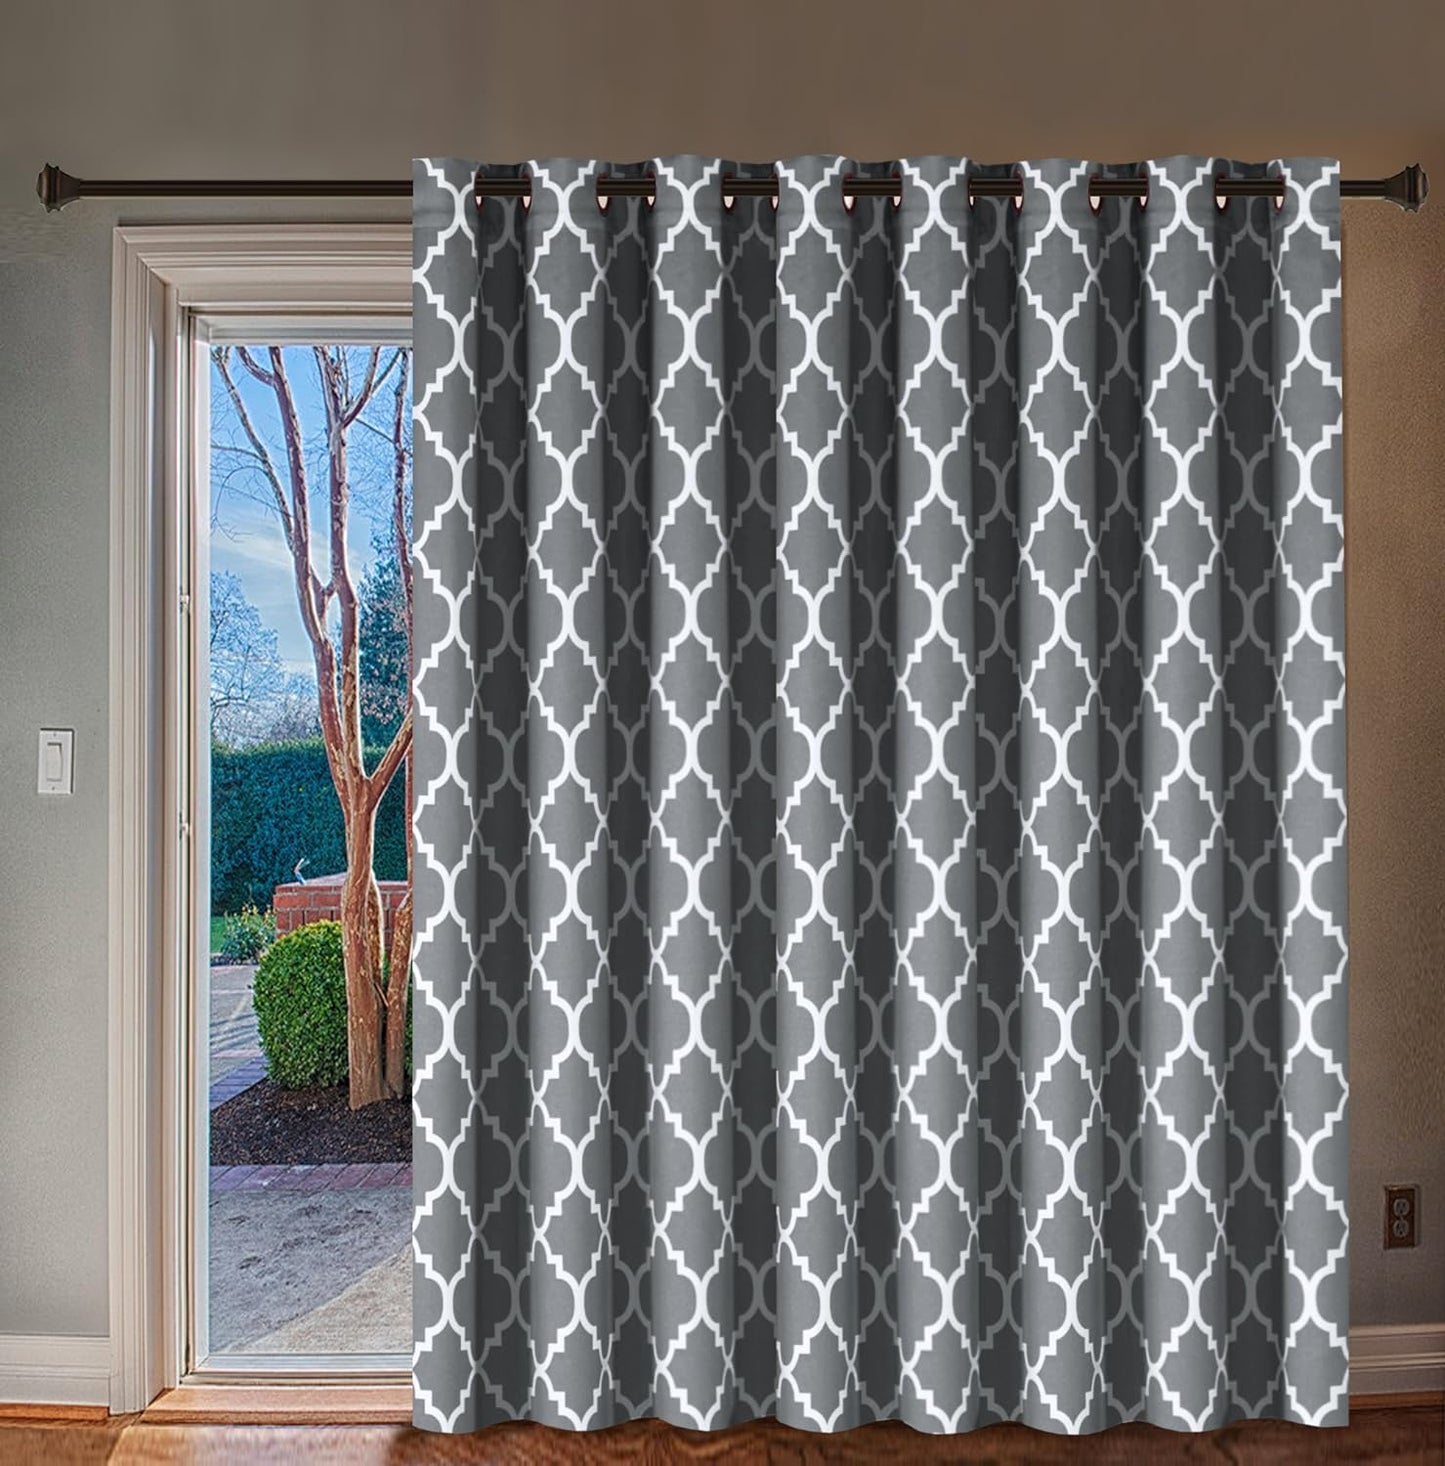 H.VERSAILTEX Extra Wide Blackout Curtain 100X84 Inches Thermal Insulated Curtain for Sliding Glass Door -Grommet Top Patio Door Curtain - Moroccan Tile Quatrefoil Pattern, Dove and White  H.VERSAILTEX Grey  White 100"W X 84"L 